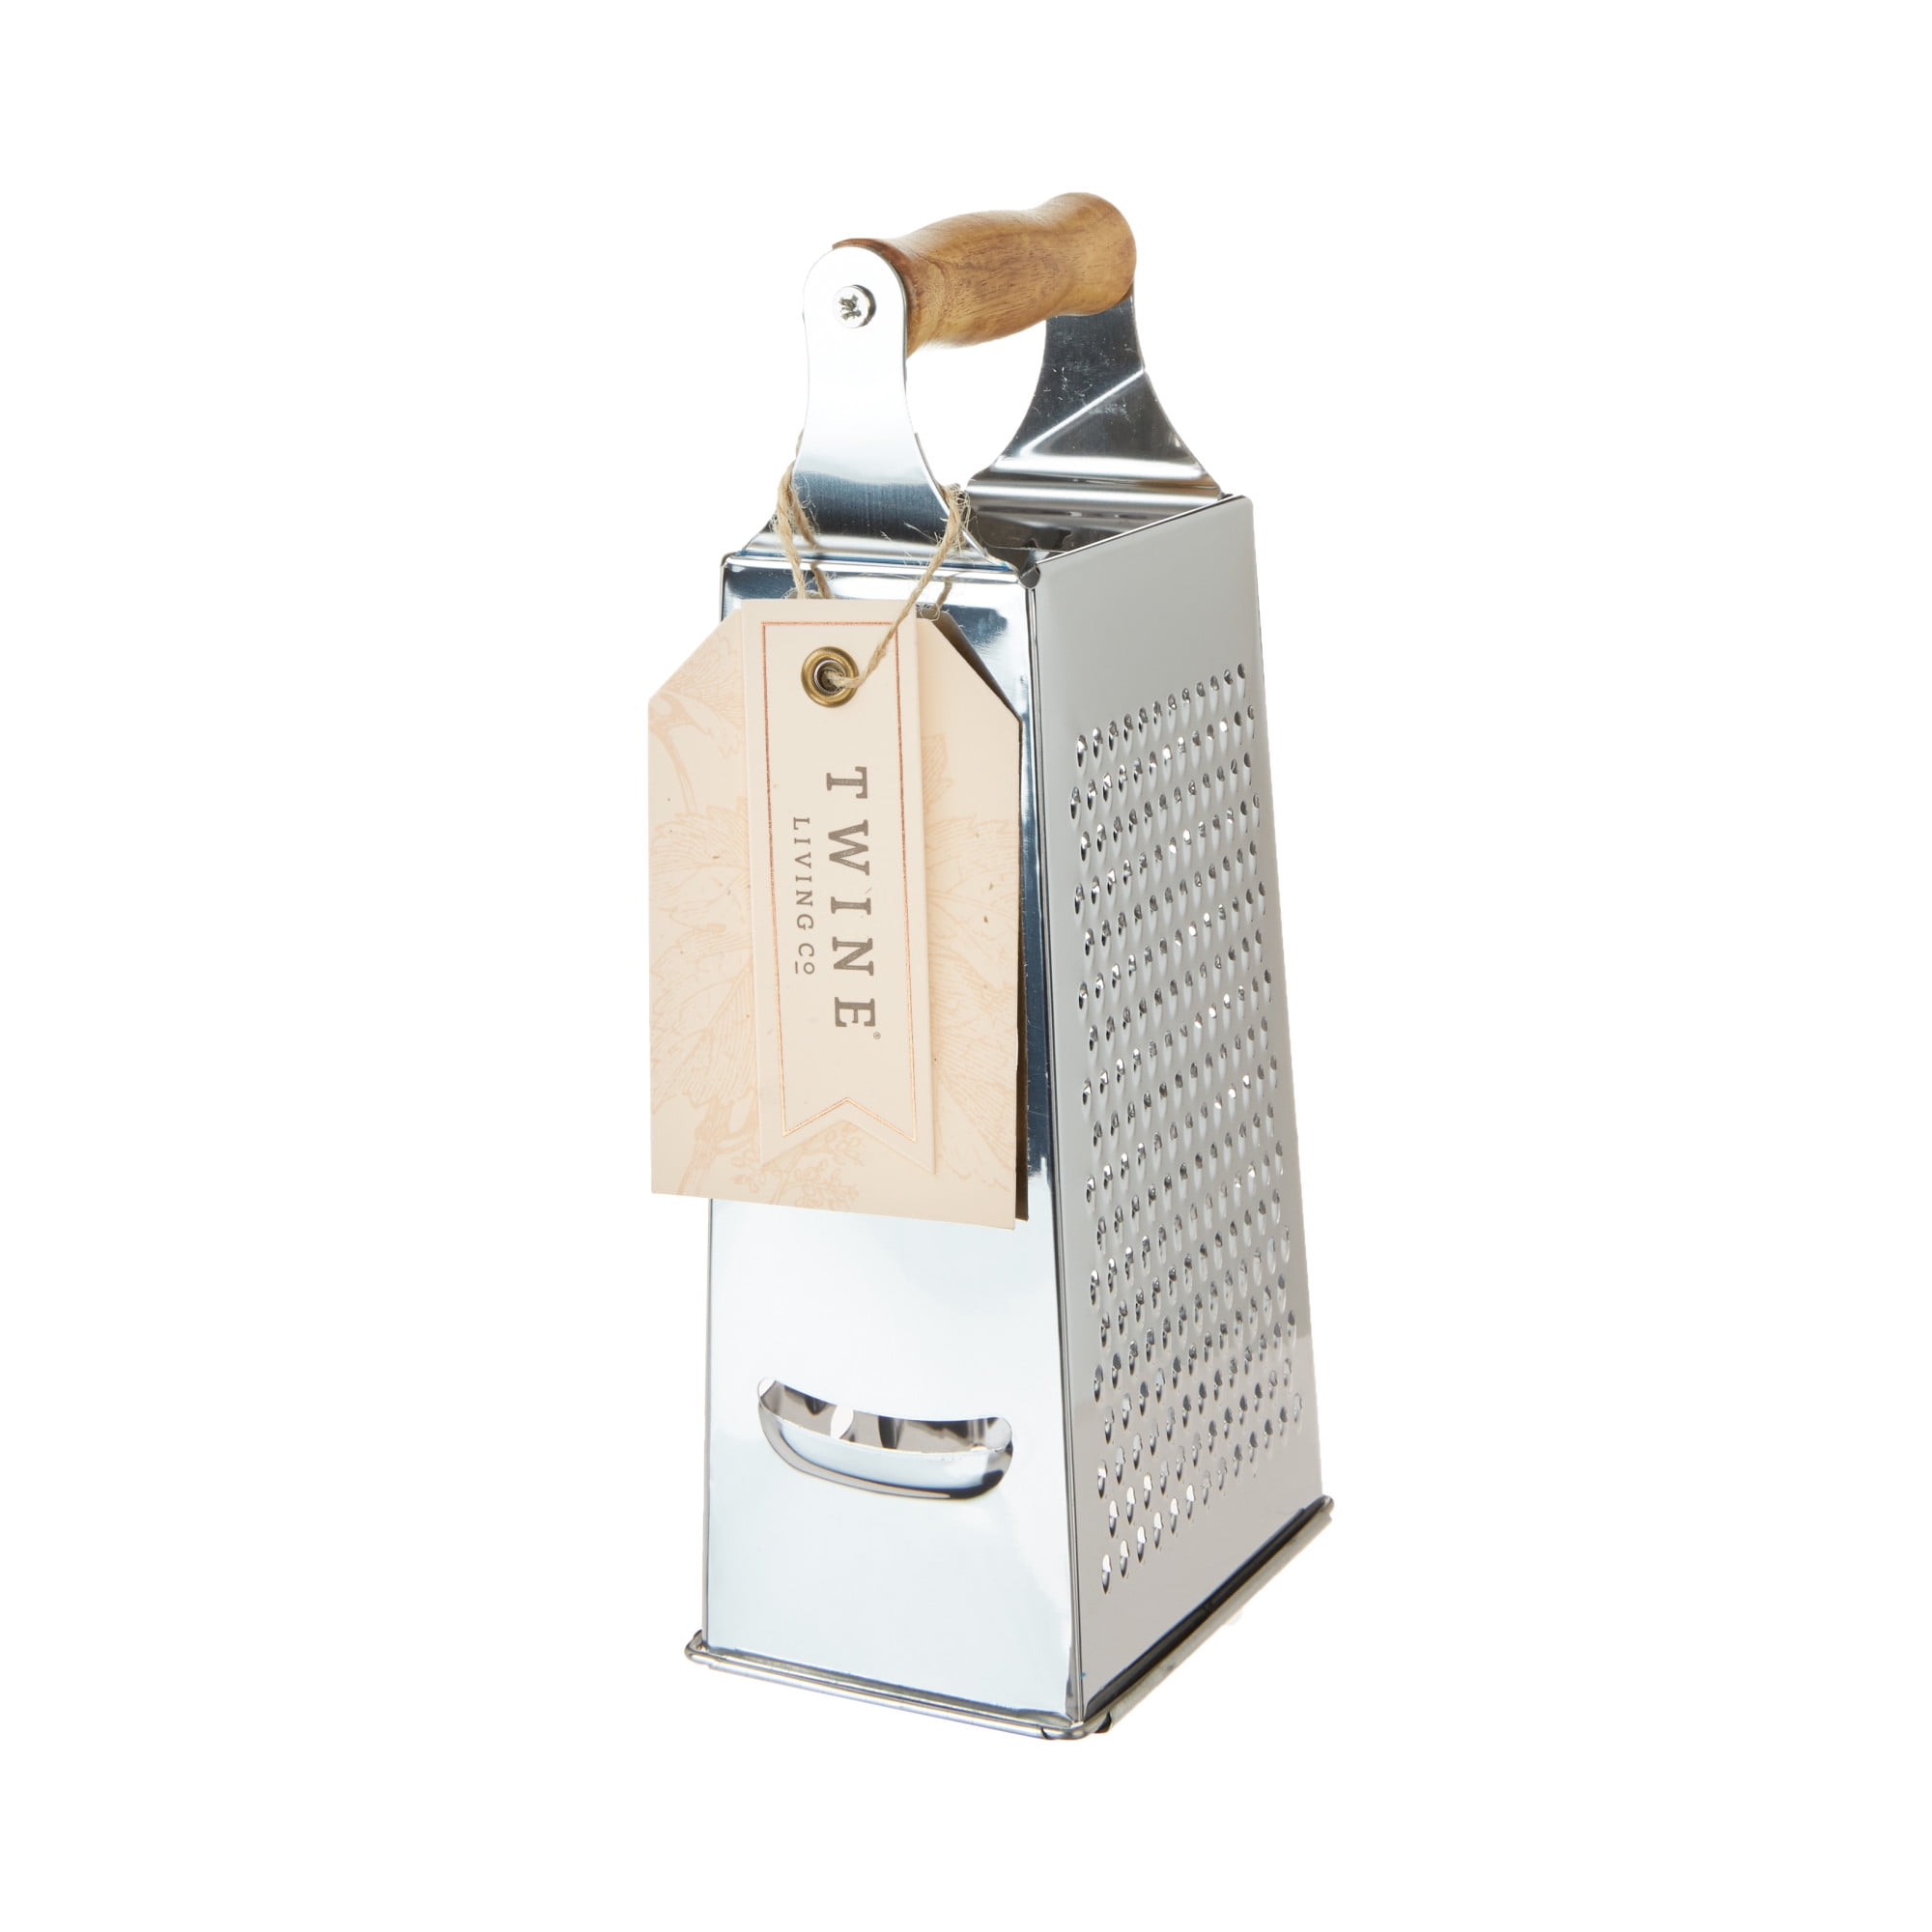 Acacia Wood & Stainless Steel Cheese Grater - White Birch Design Company